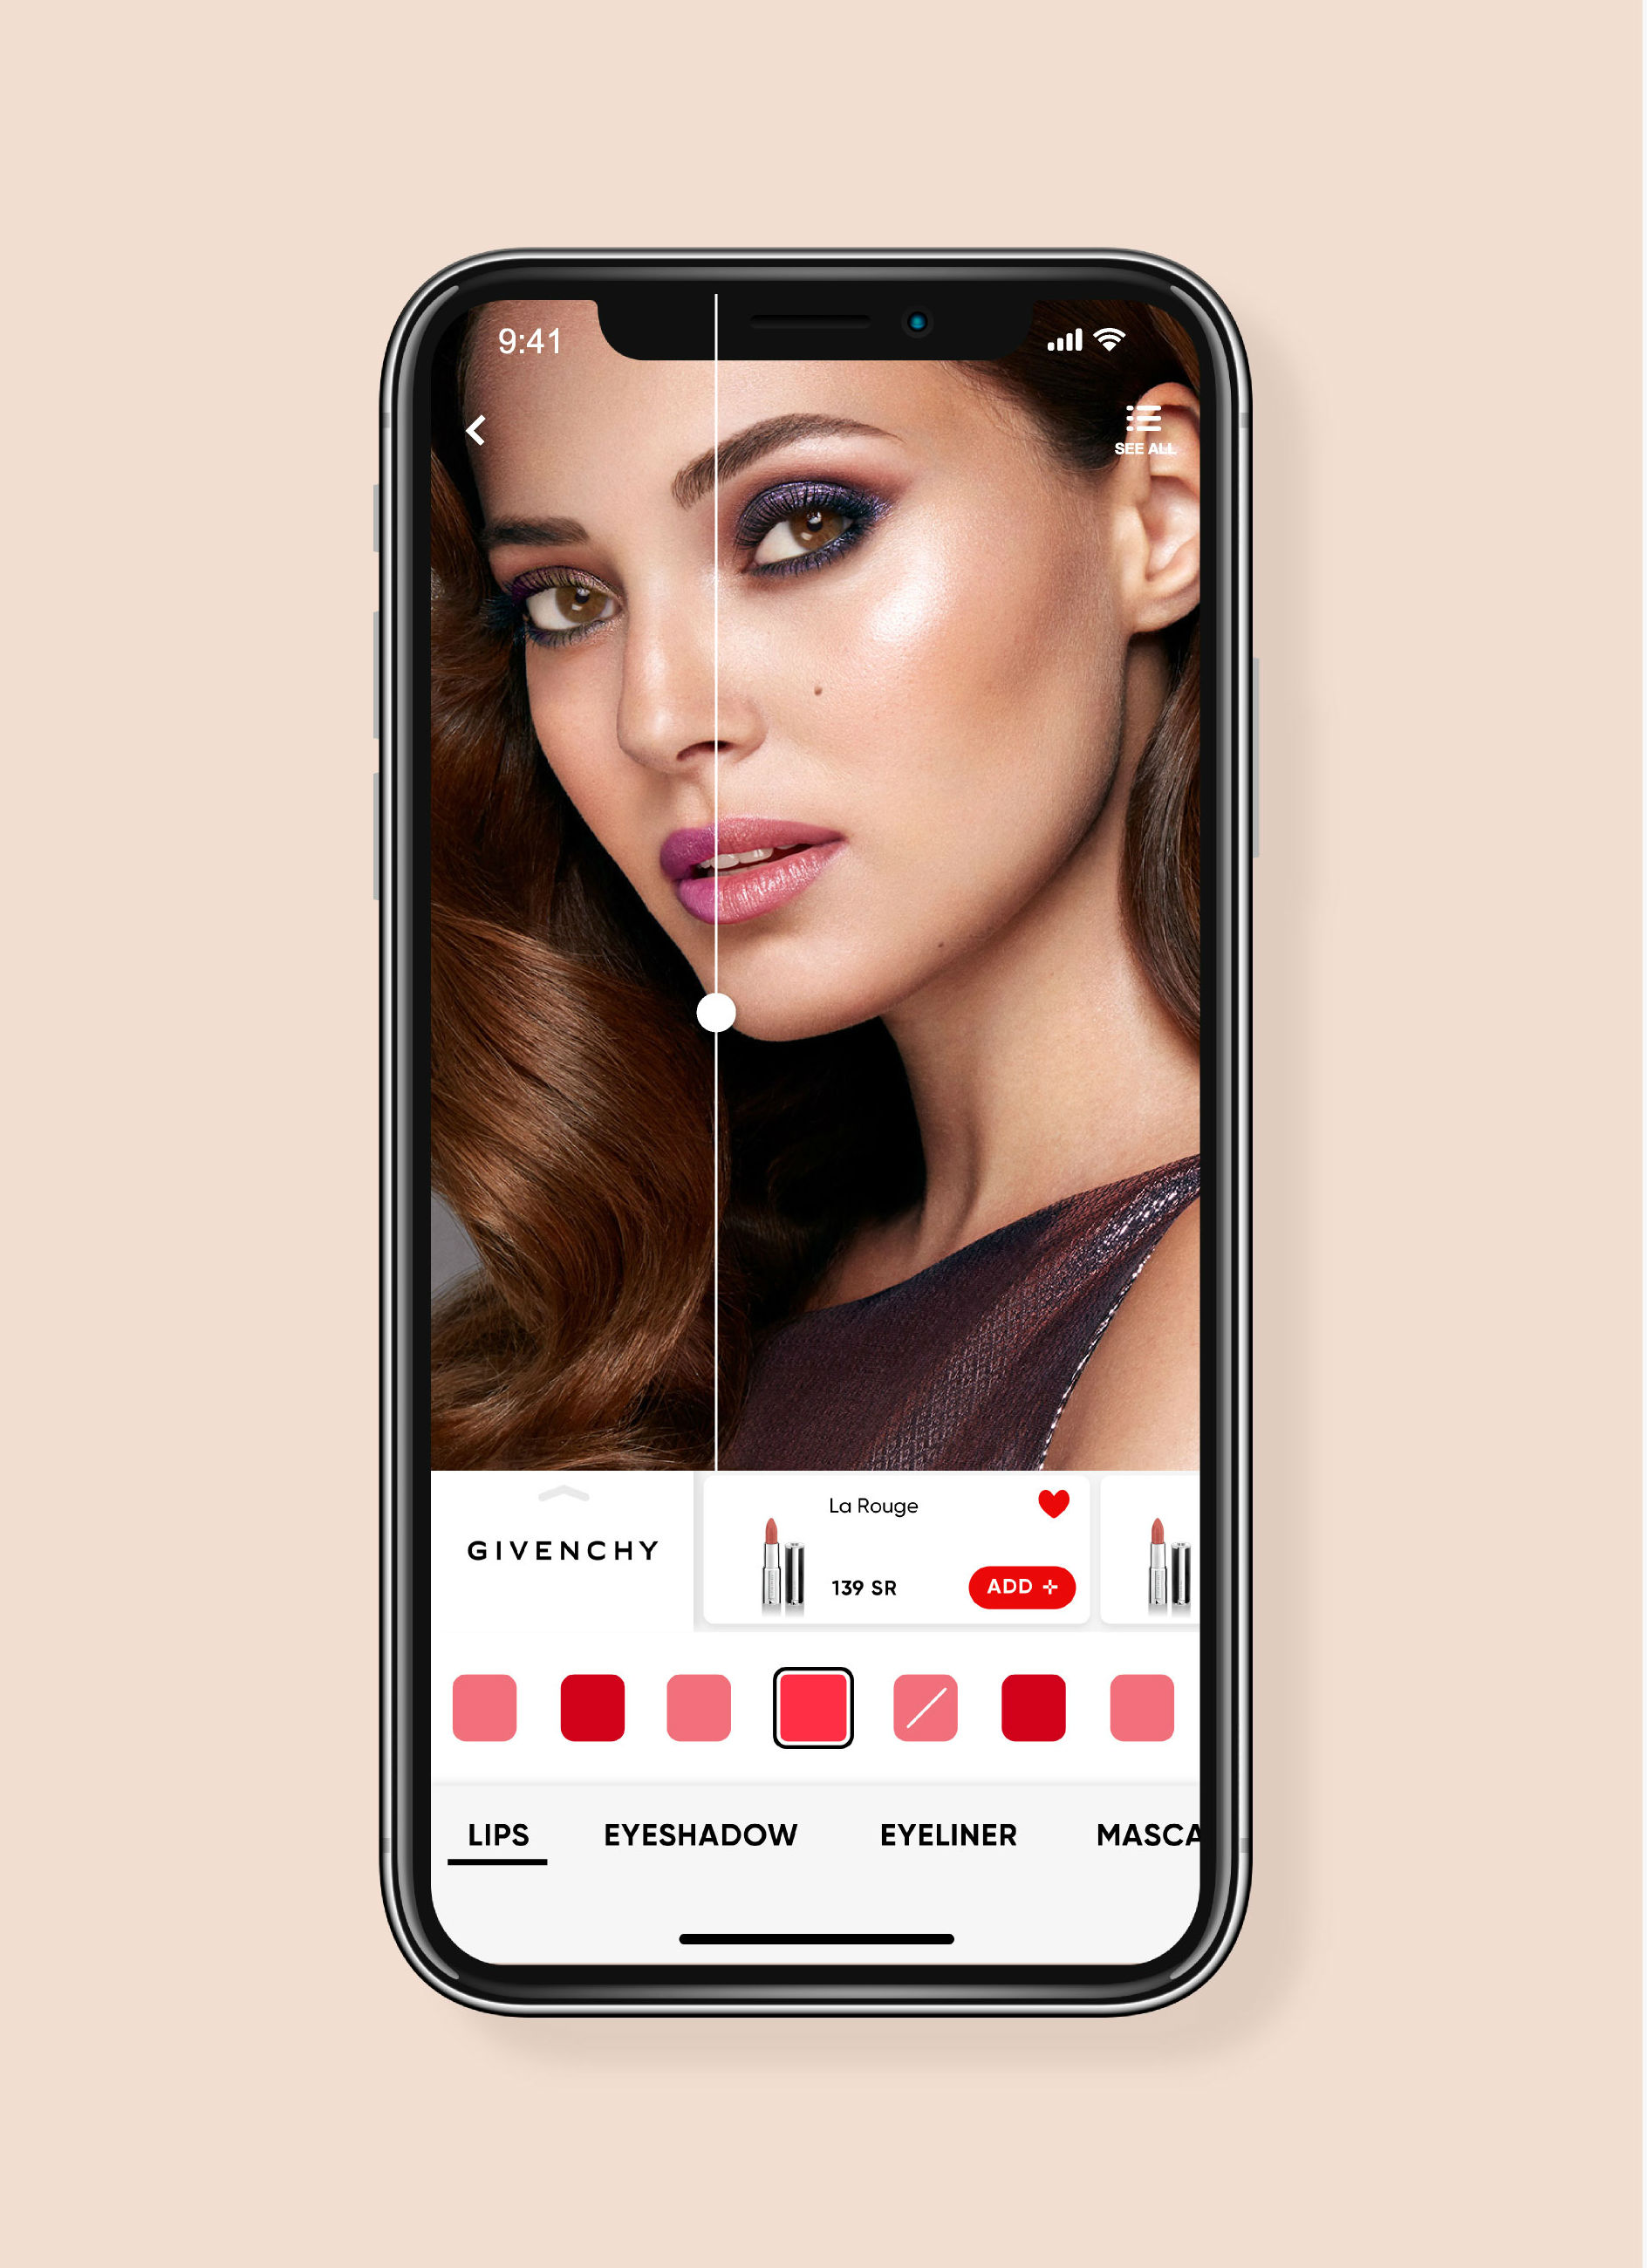 Try Makeup Before You Buy with Golden Scent's Augmented Reality Feature